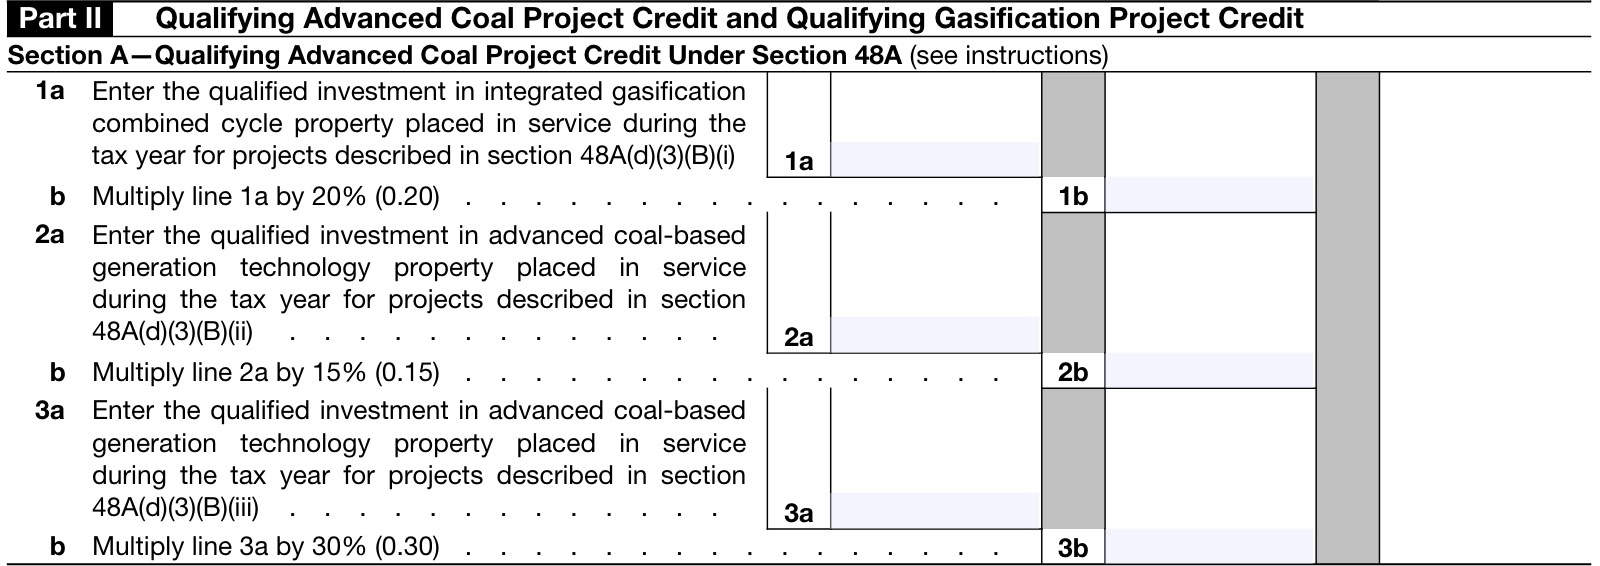 irs form 3468, Part II, Section A: Qualifying advanced coal project credit